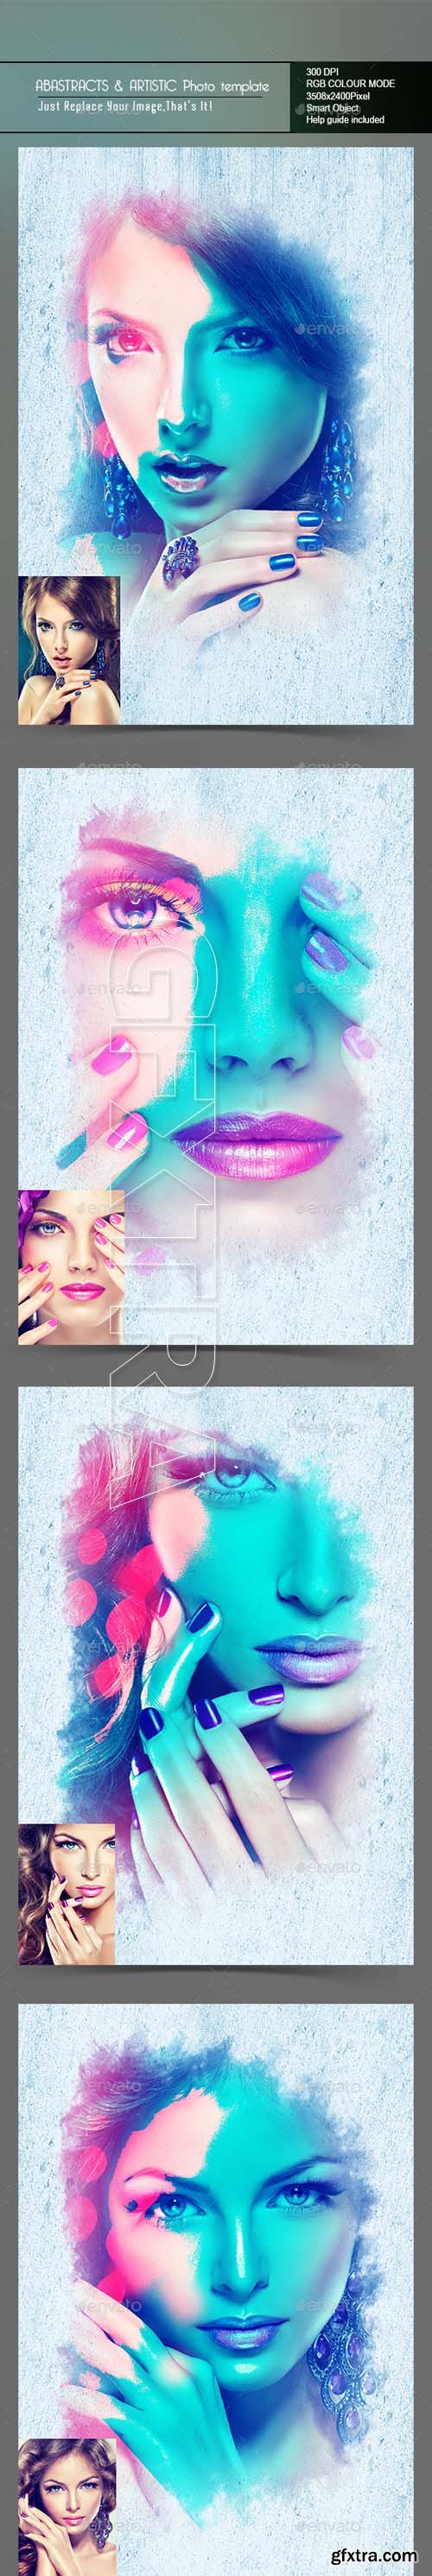 Graphicriver - Abstract & Artistic Photo Manupolation 20141809